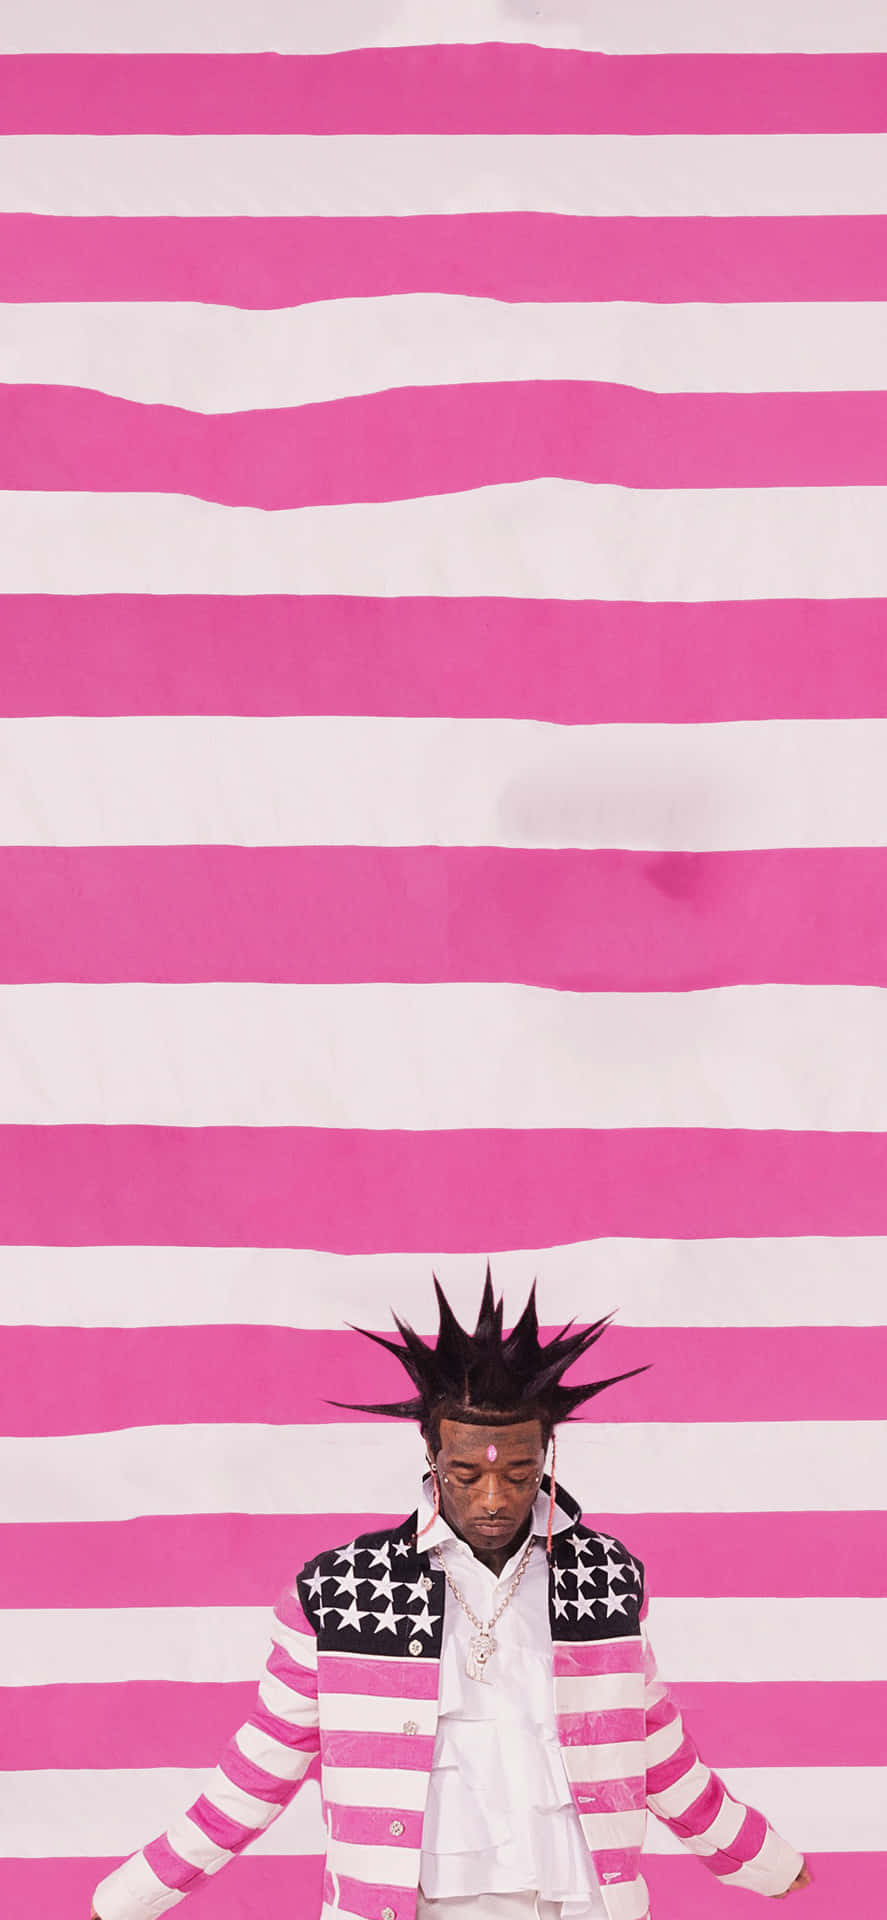 Punk Inspired Fashion Against Pink Stripes Wallpaper